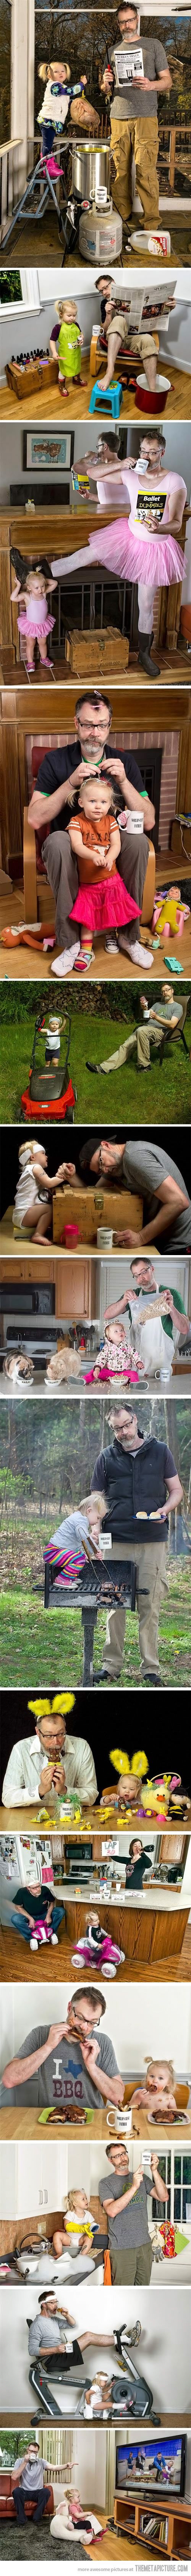 Awesome father daughter photos! :)